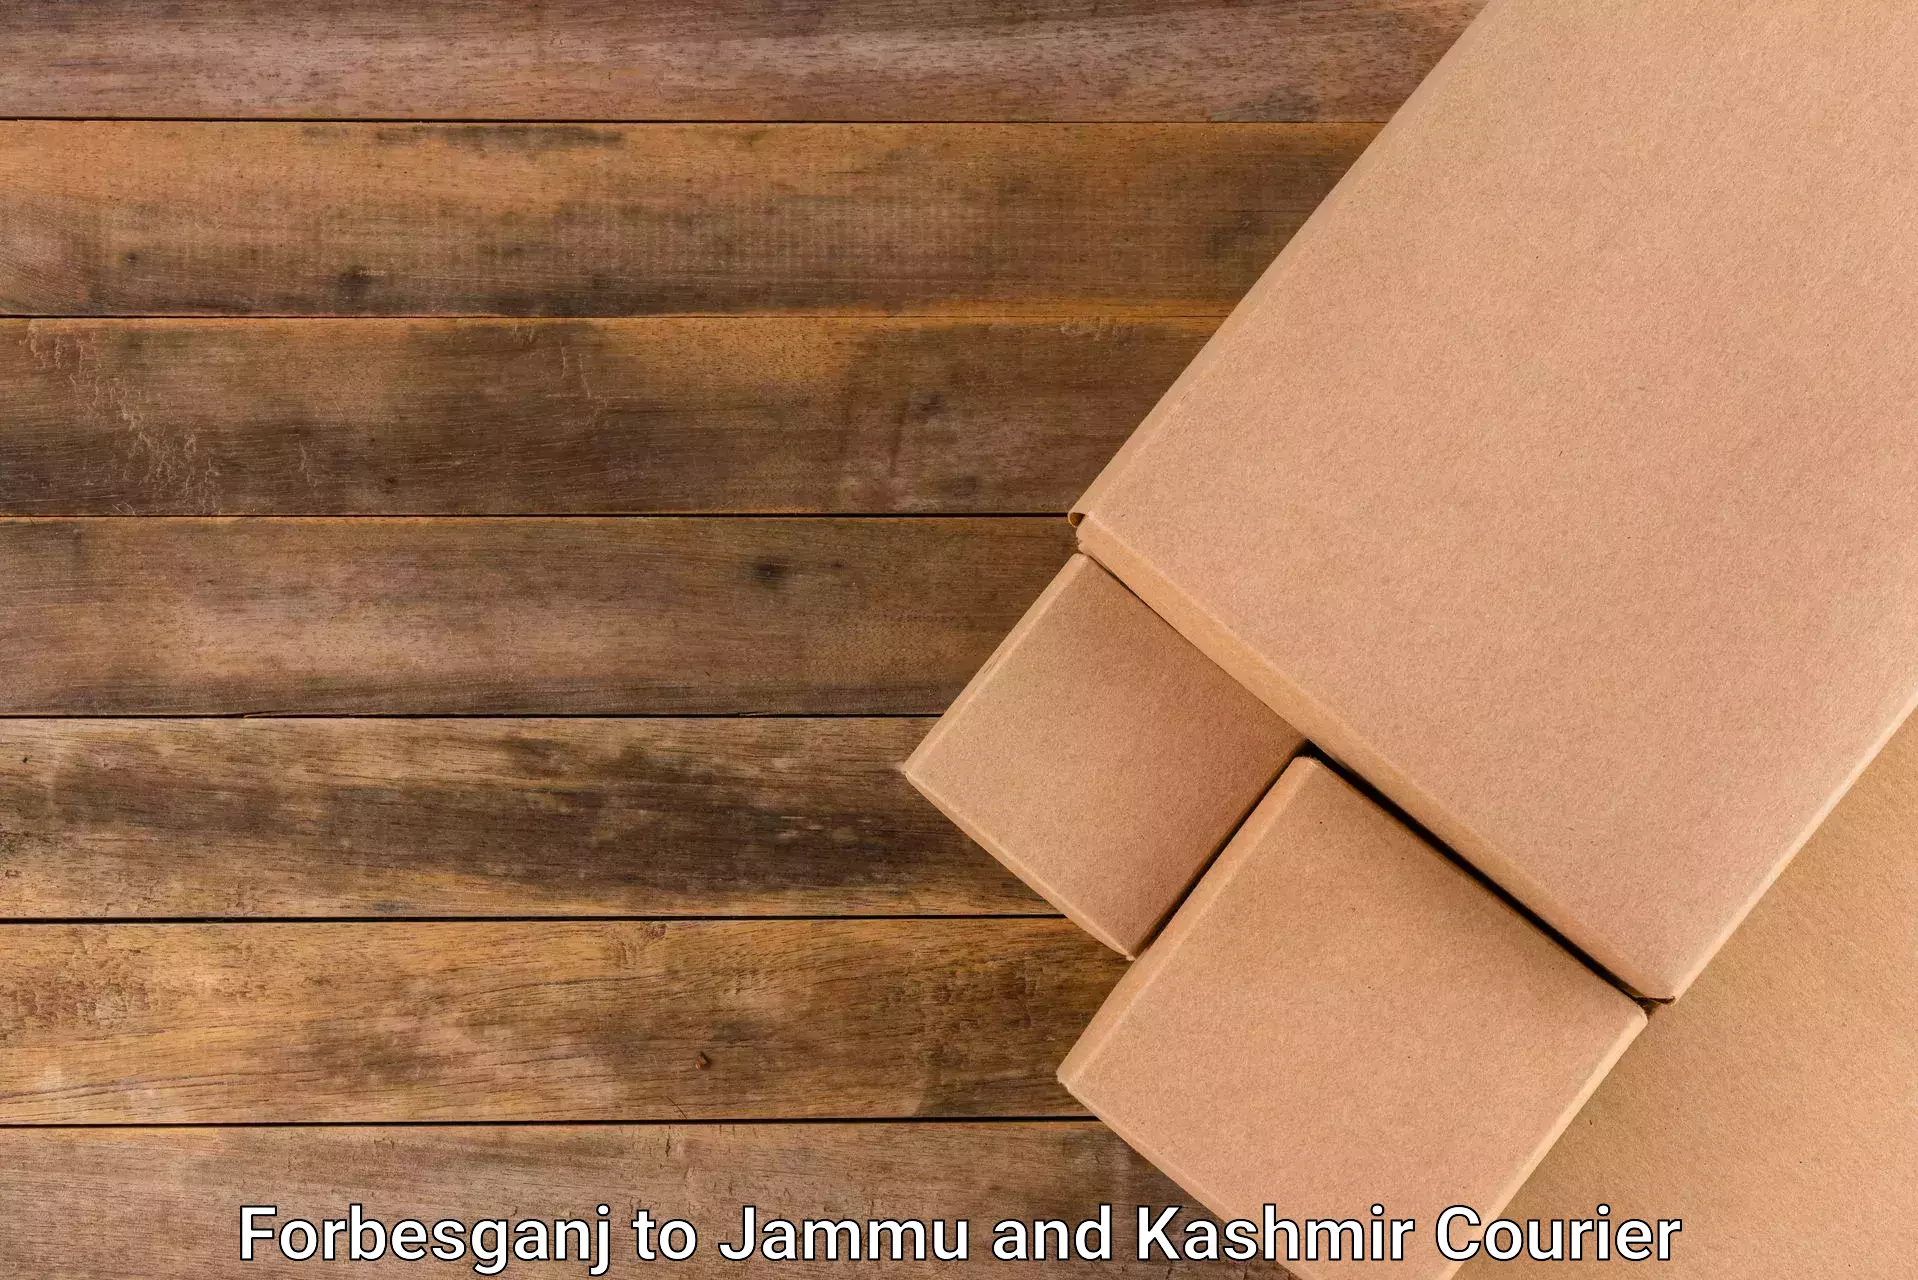 Overnight delivery services Forbesganj to Jammu and Kashmir